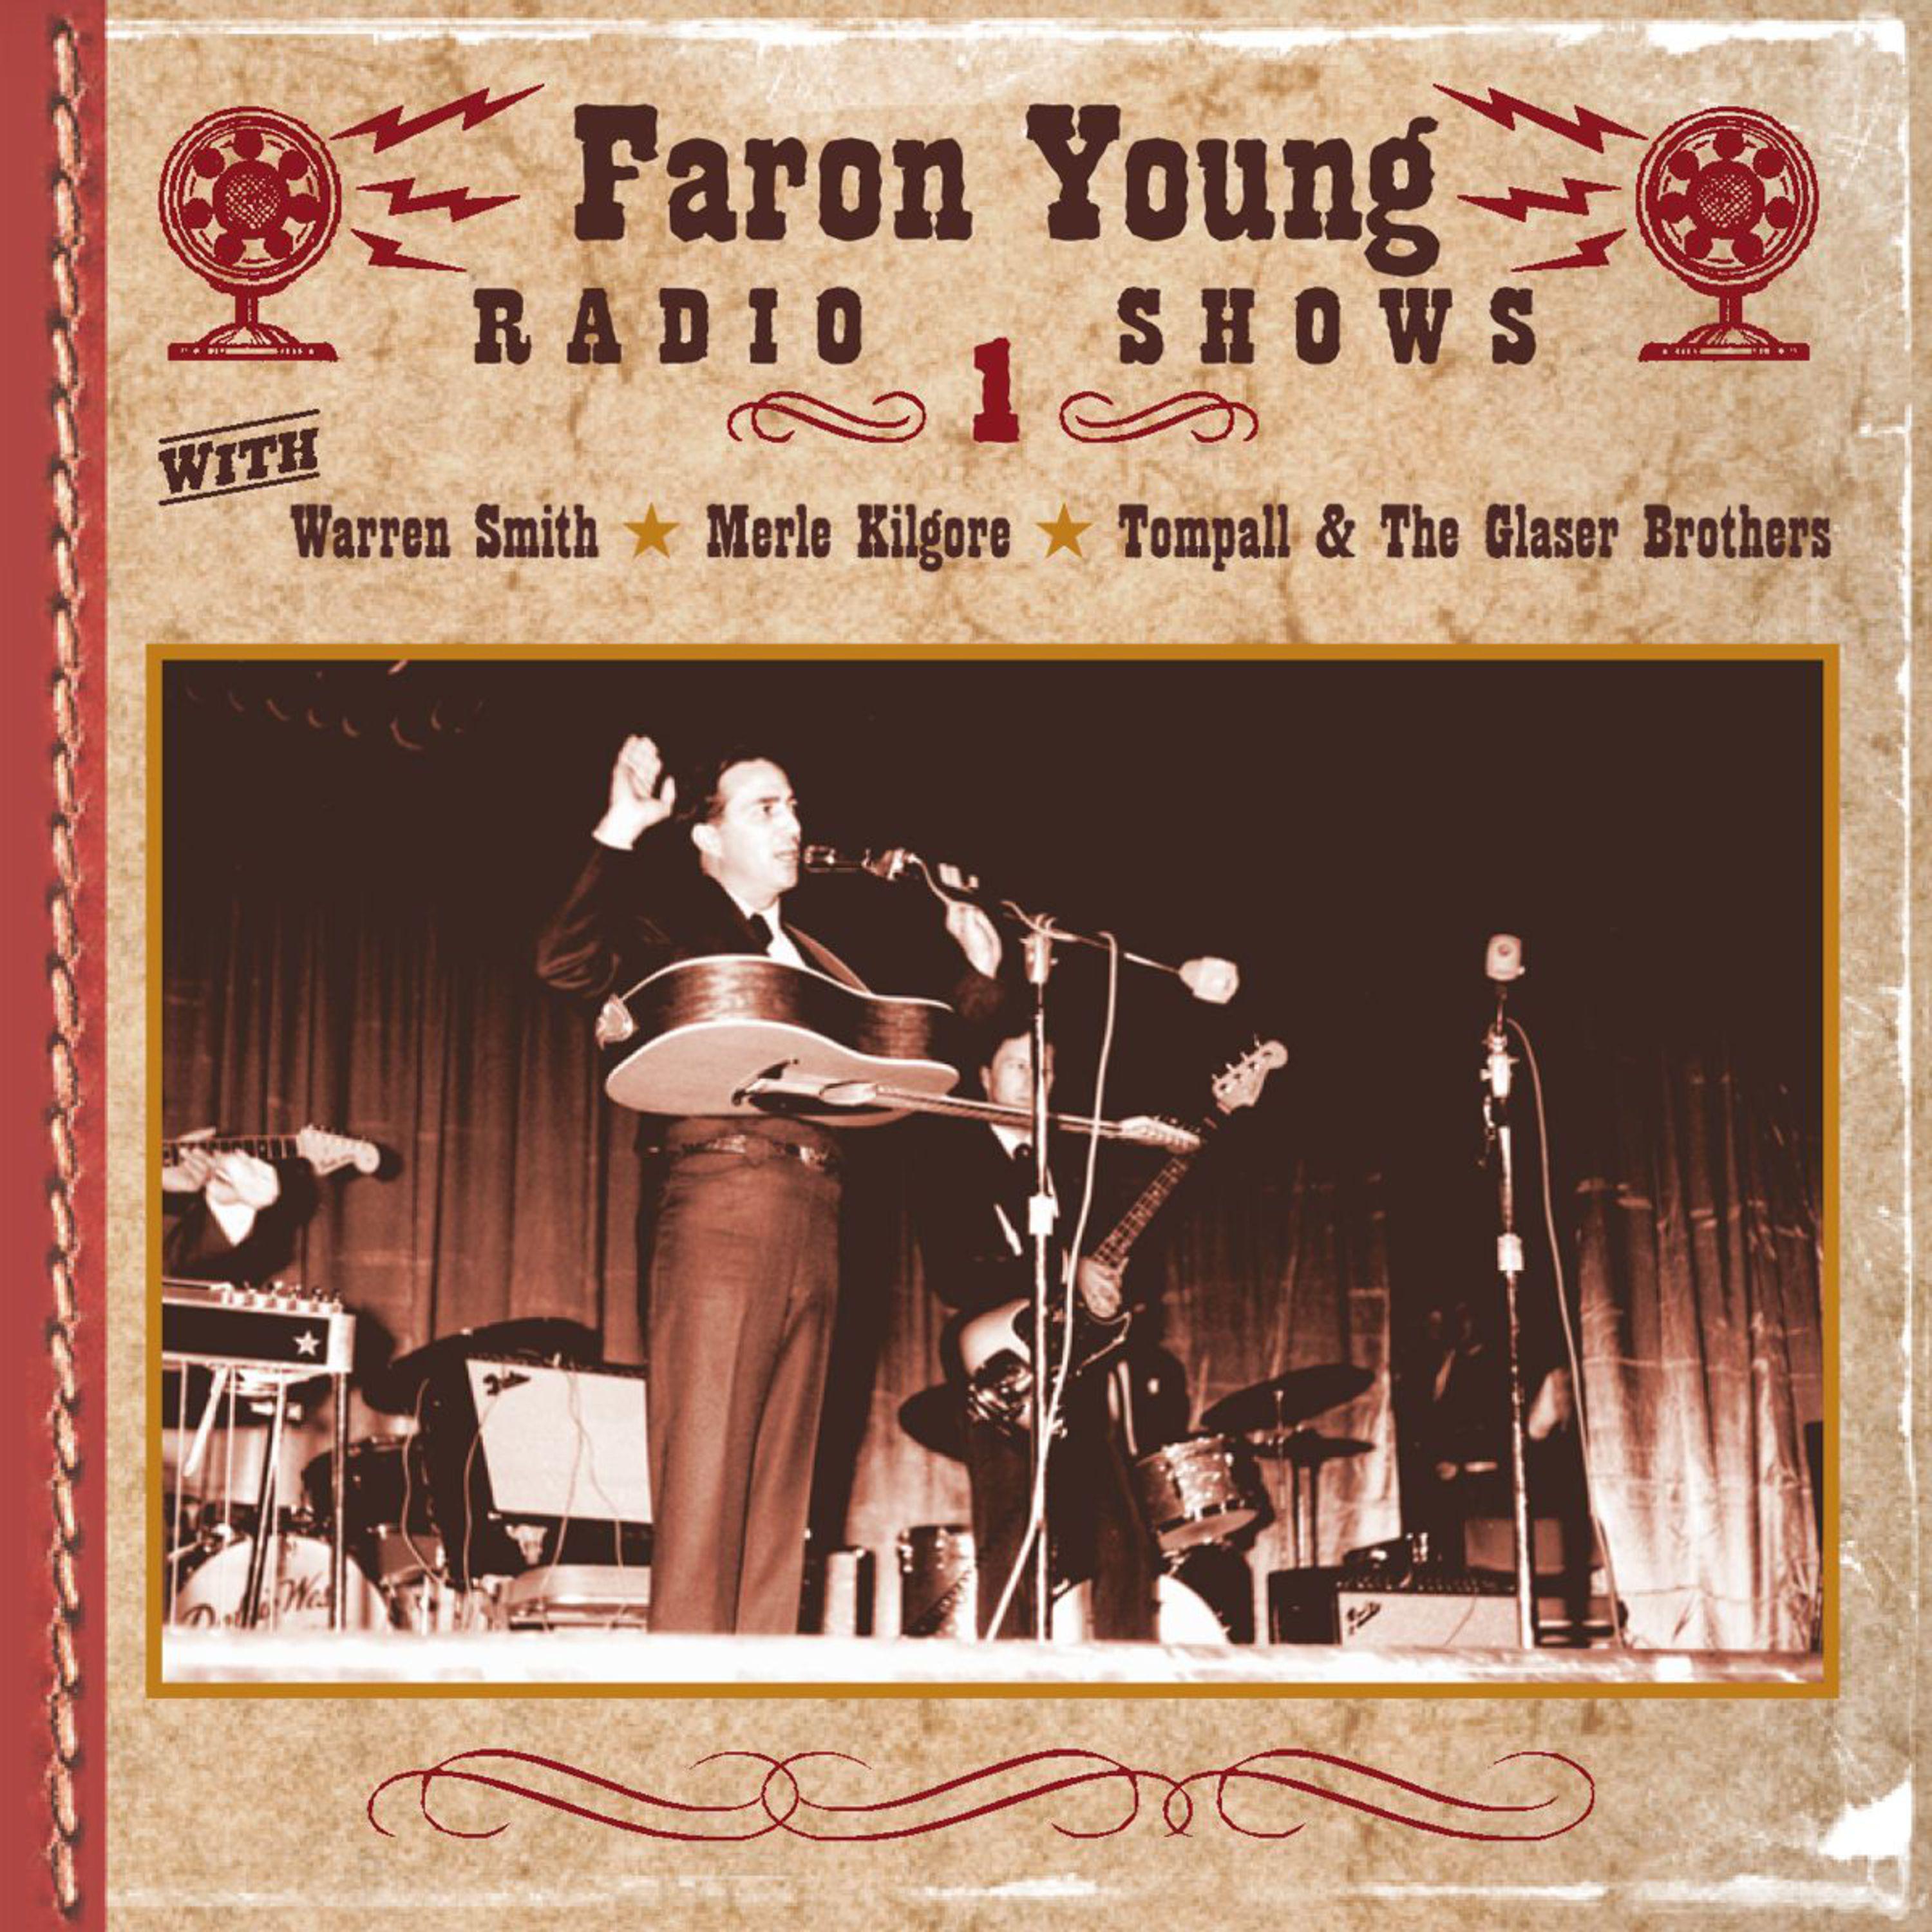 The Faron Young Radio Shows, Show 1